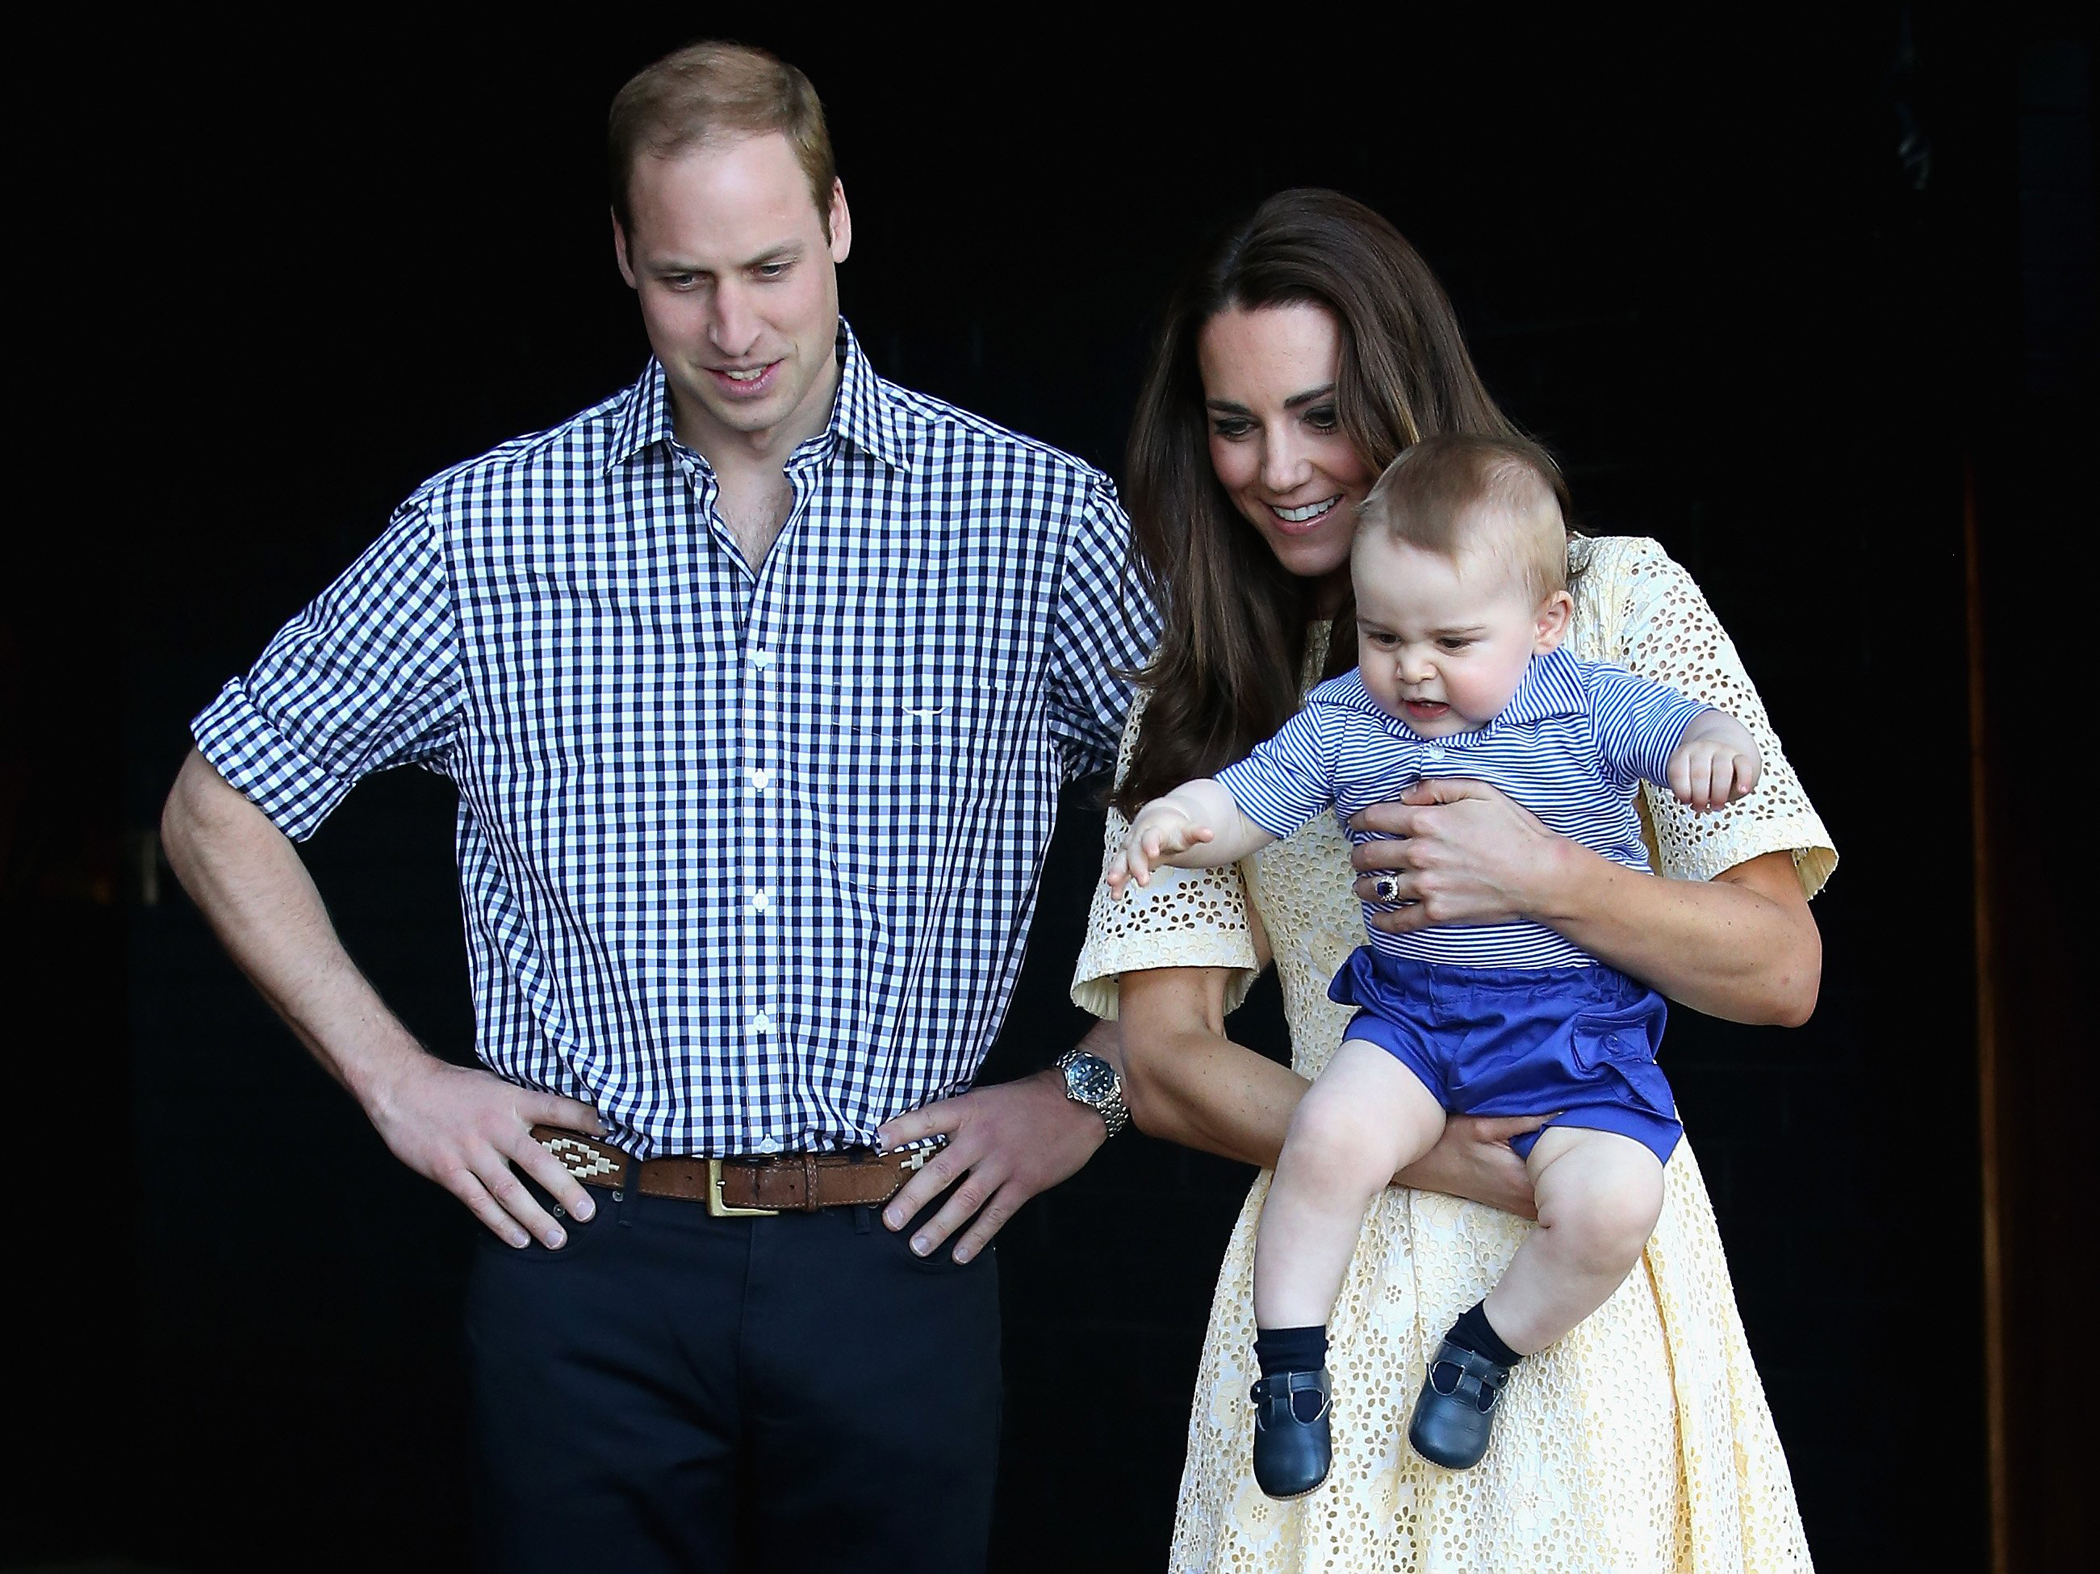 Catherine, Duchess of Cambridge holds Prince George of Cambridge as Prince William, Duke of Cambridge looks on at Taronga Zoo on April 20, 2014 in Sydney.